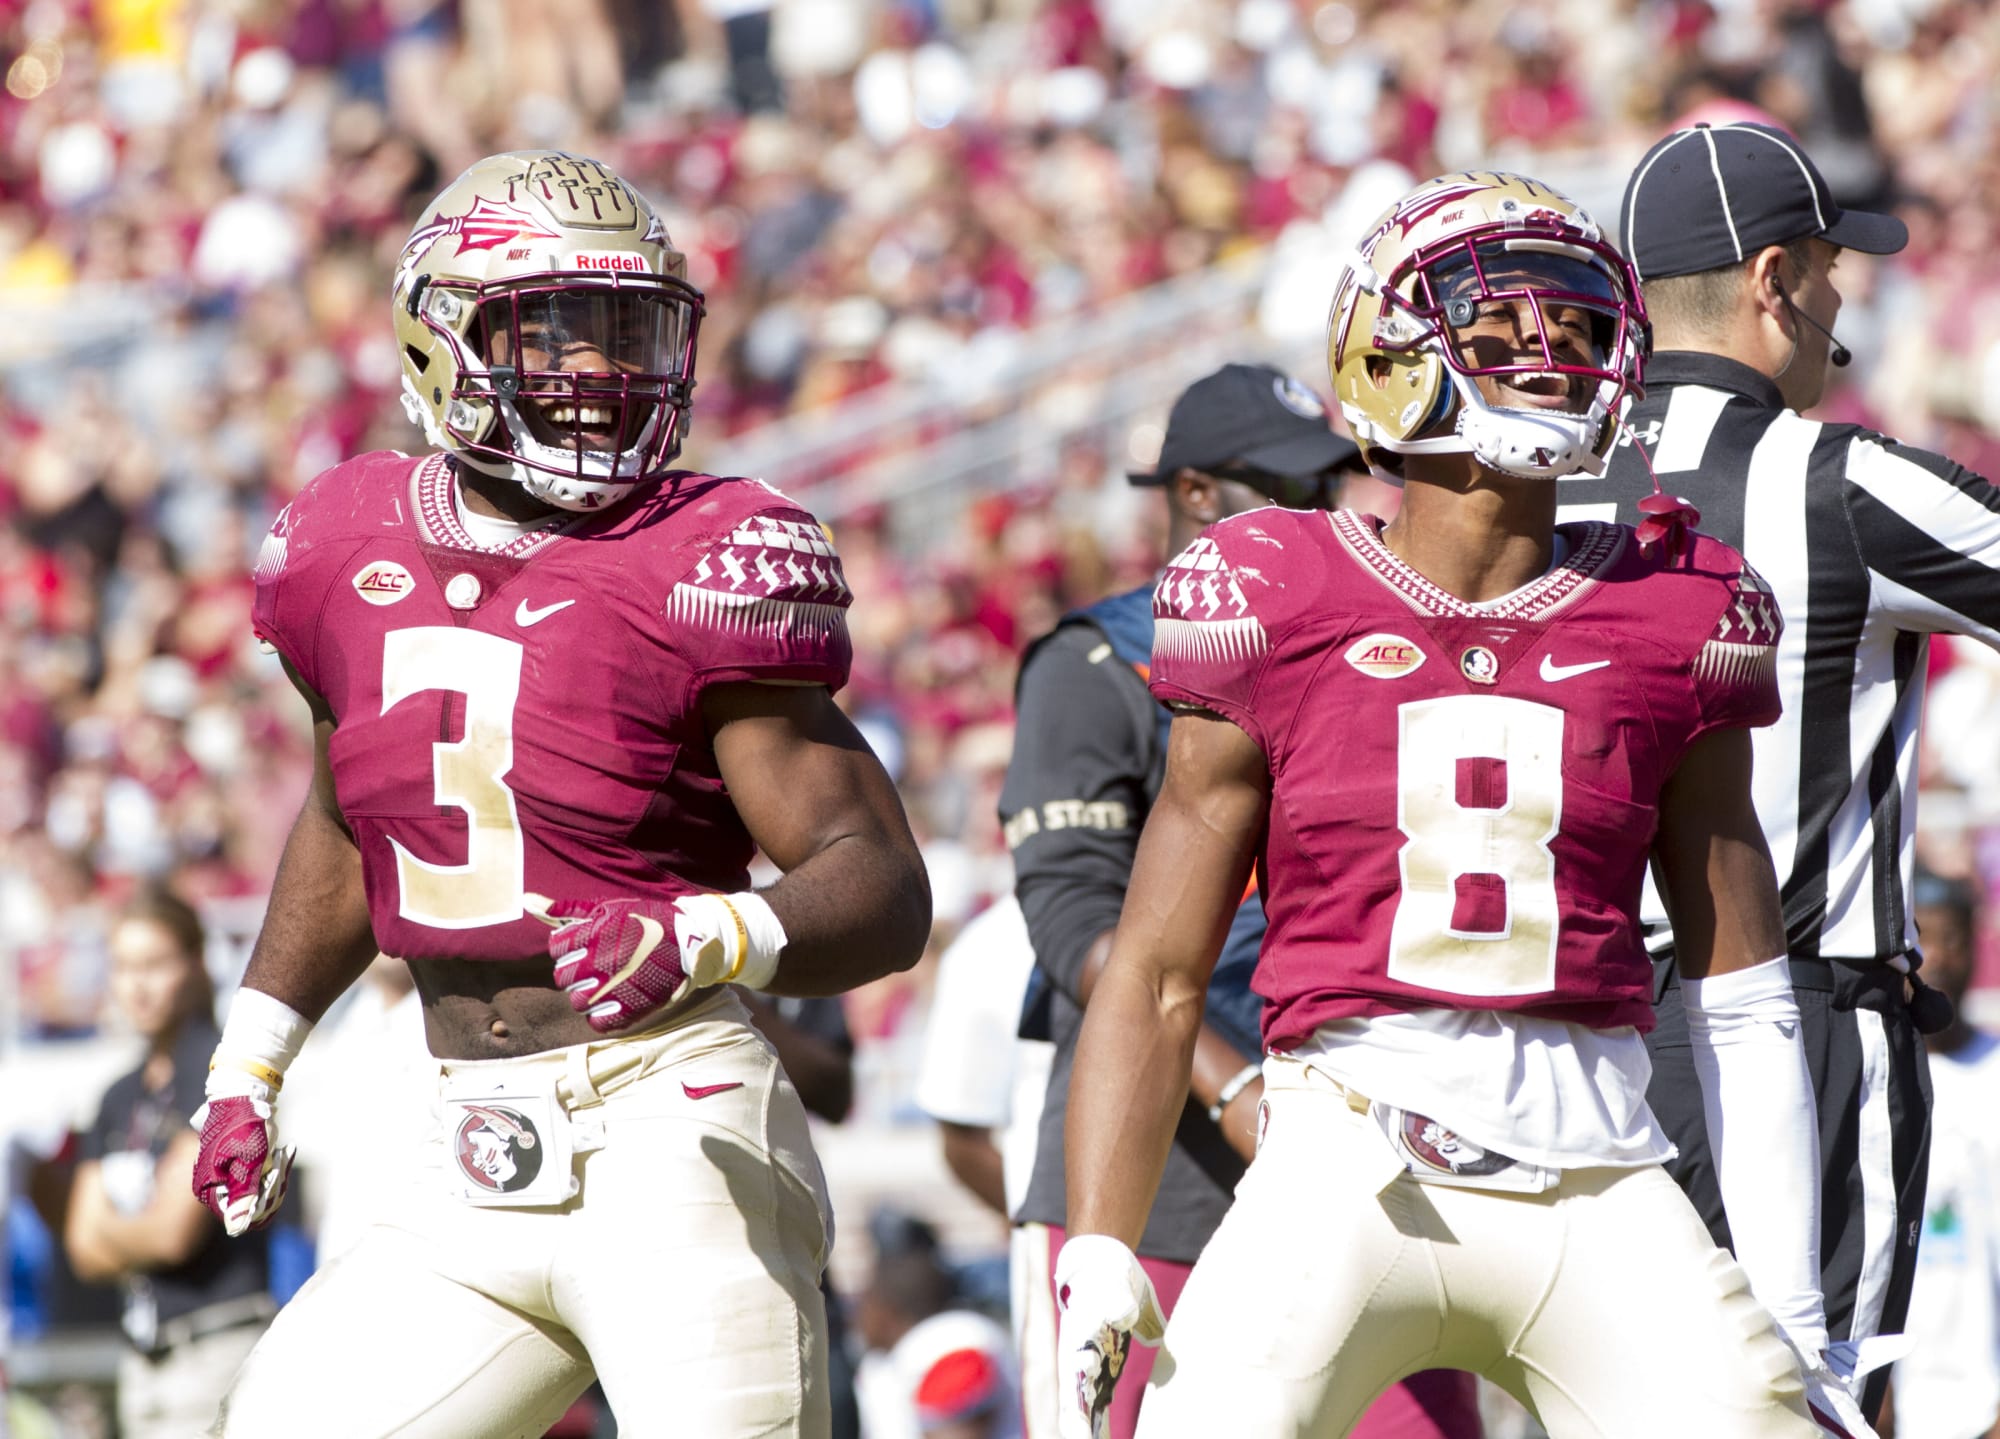 Virginia Tech vs. Florida State Preview, predictions, TV schedule and